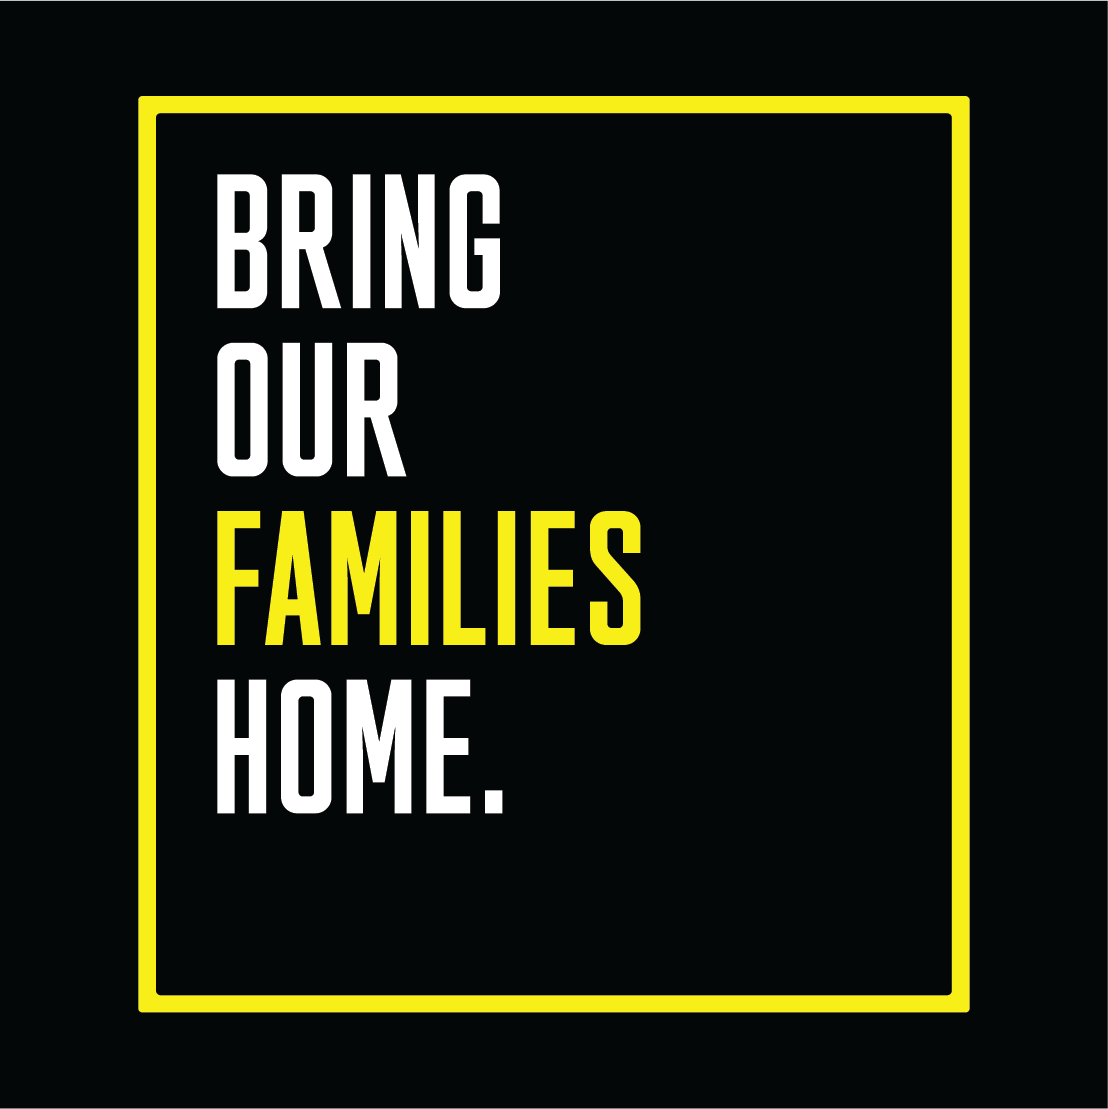 BRING OUR FAMILIES HOME CAMPAIGN